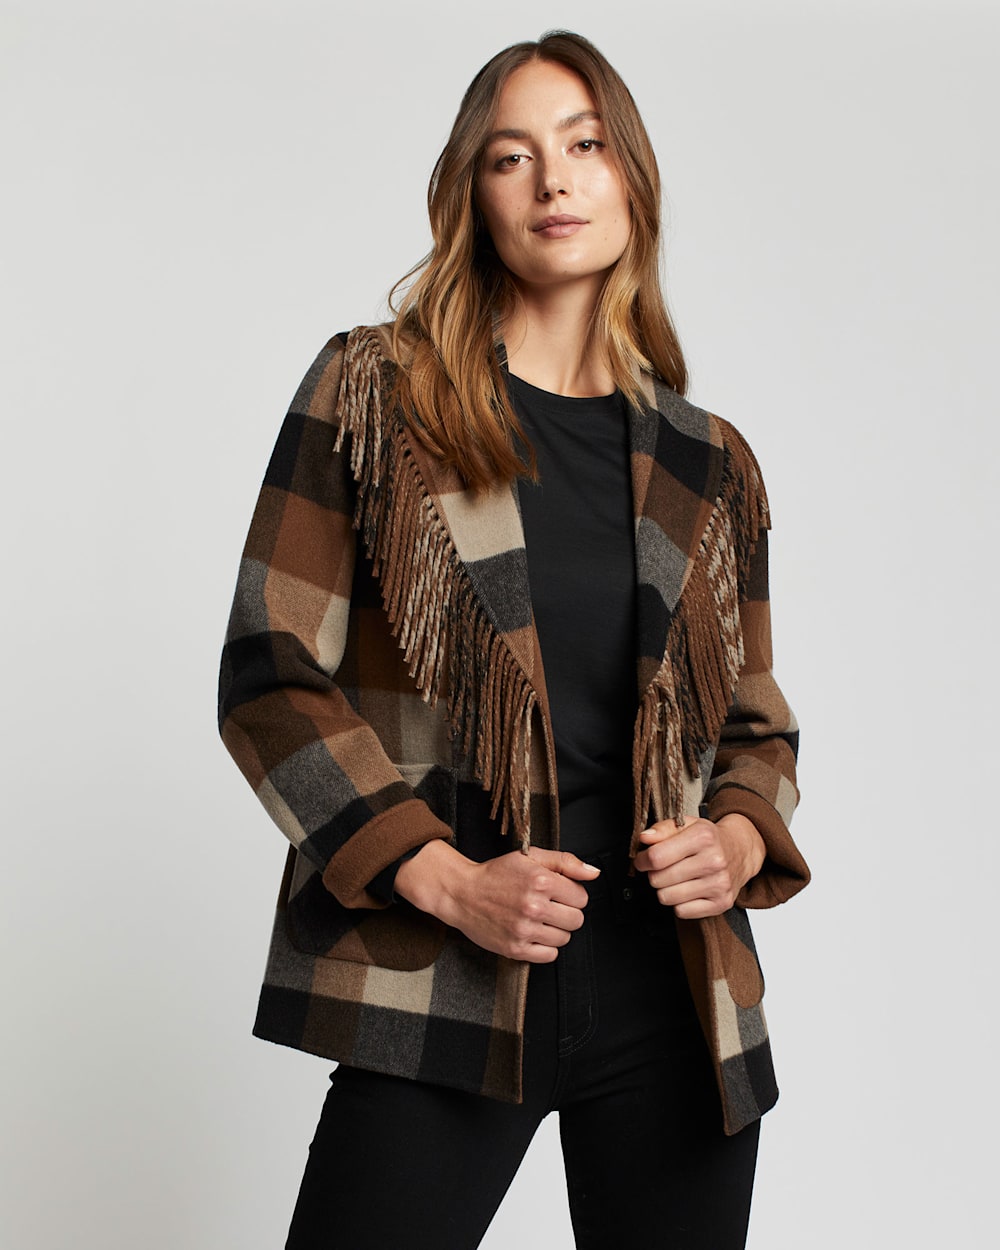 ALTERNATE VIEW OF WOMEN'S CHEYENNE FRINGED SHAWL-COLLAR COAT IN CAMEL/CHARCOAL PLAID image number 5